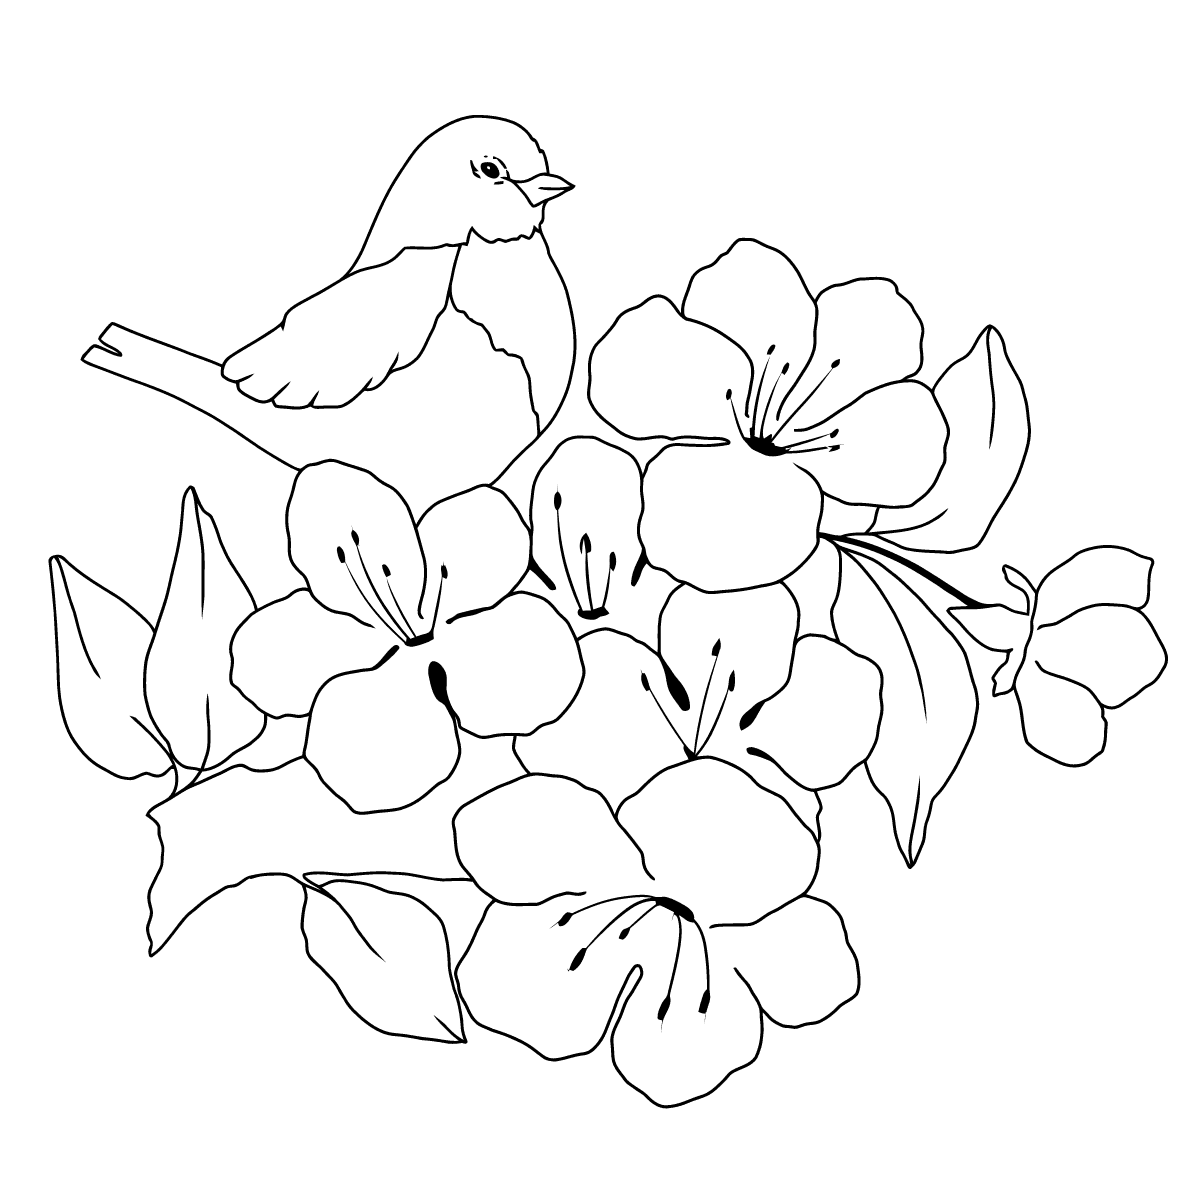 Summer and Birds coloring page ♥ Online and Print for Free